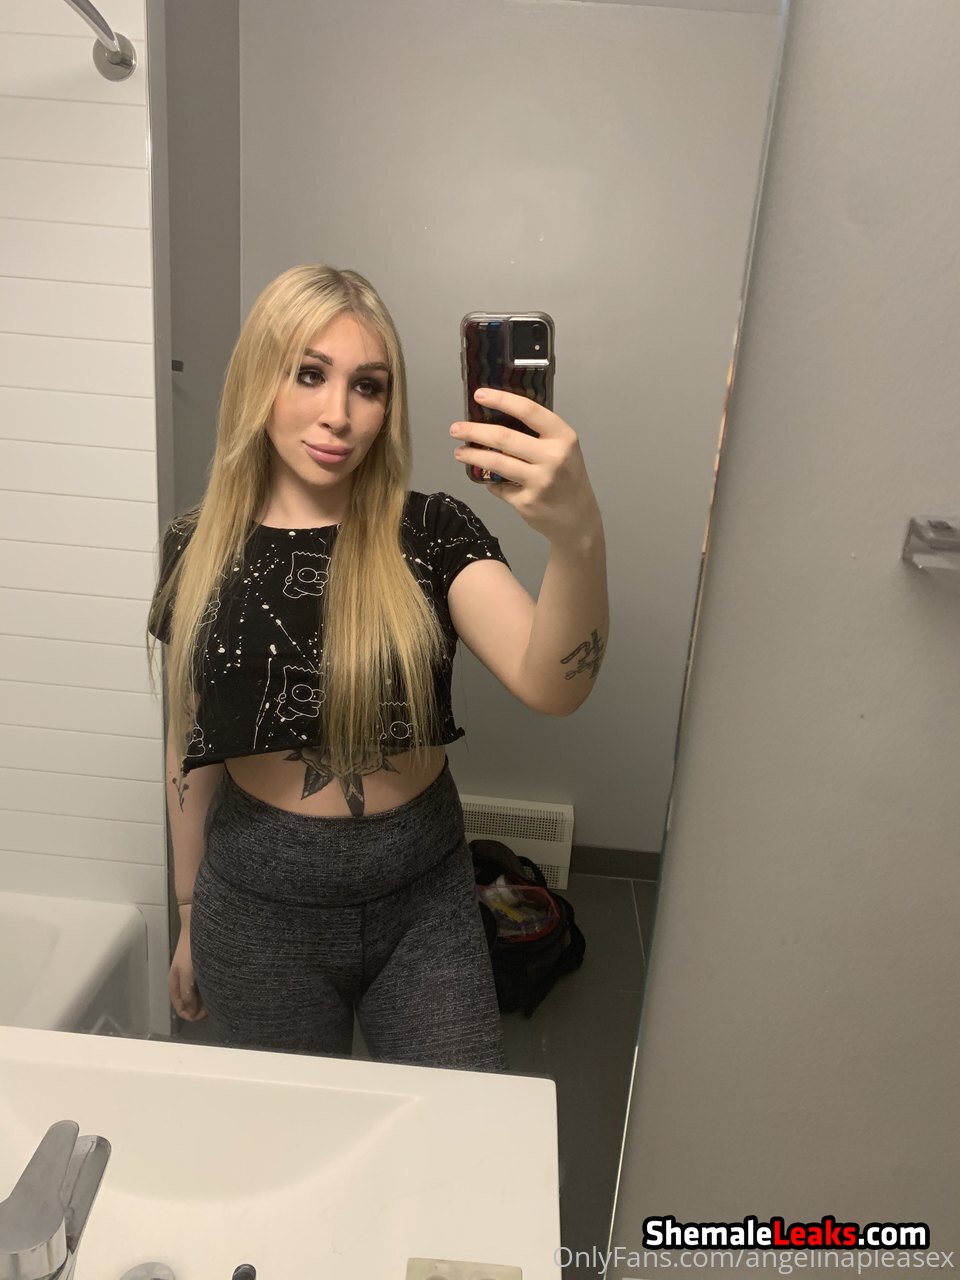 AngelinaPleaseX OnlyFans Leaks (47 Photos and 8 Videos)